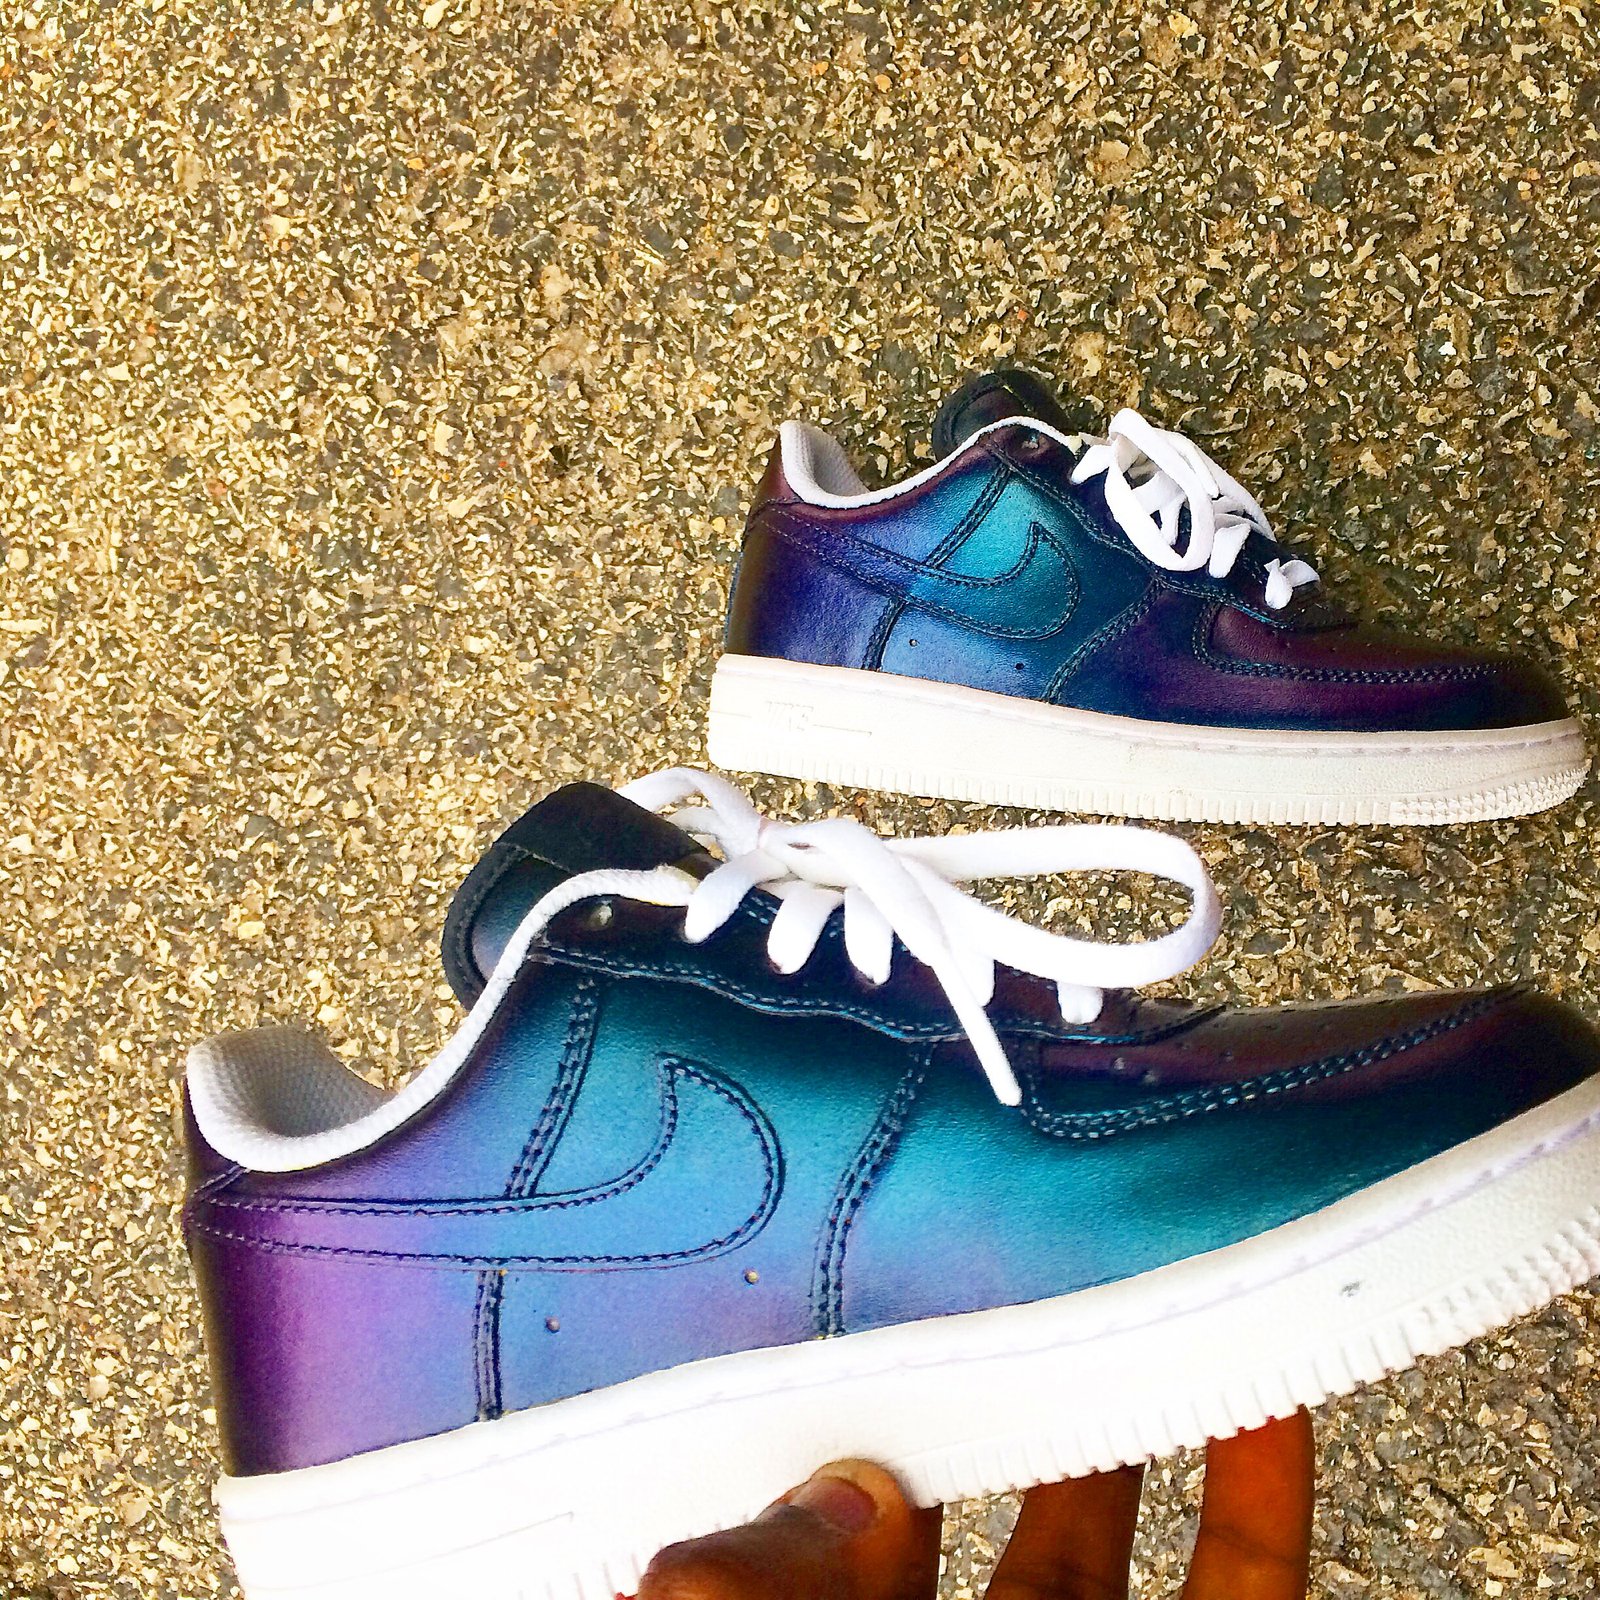 the new color changing air force ones